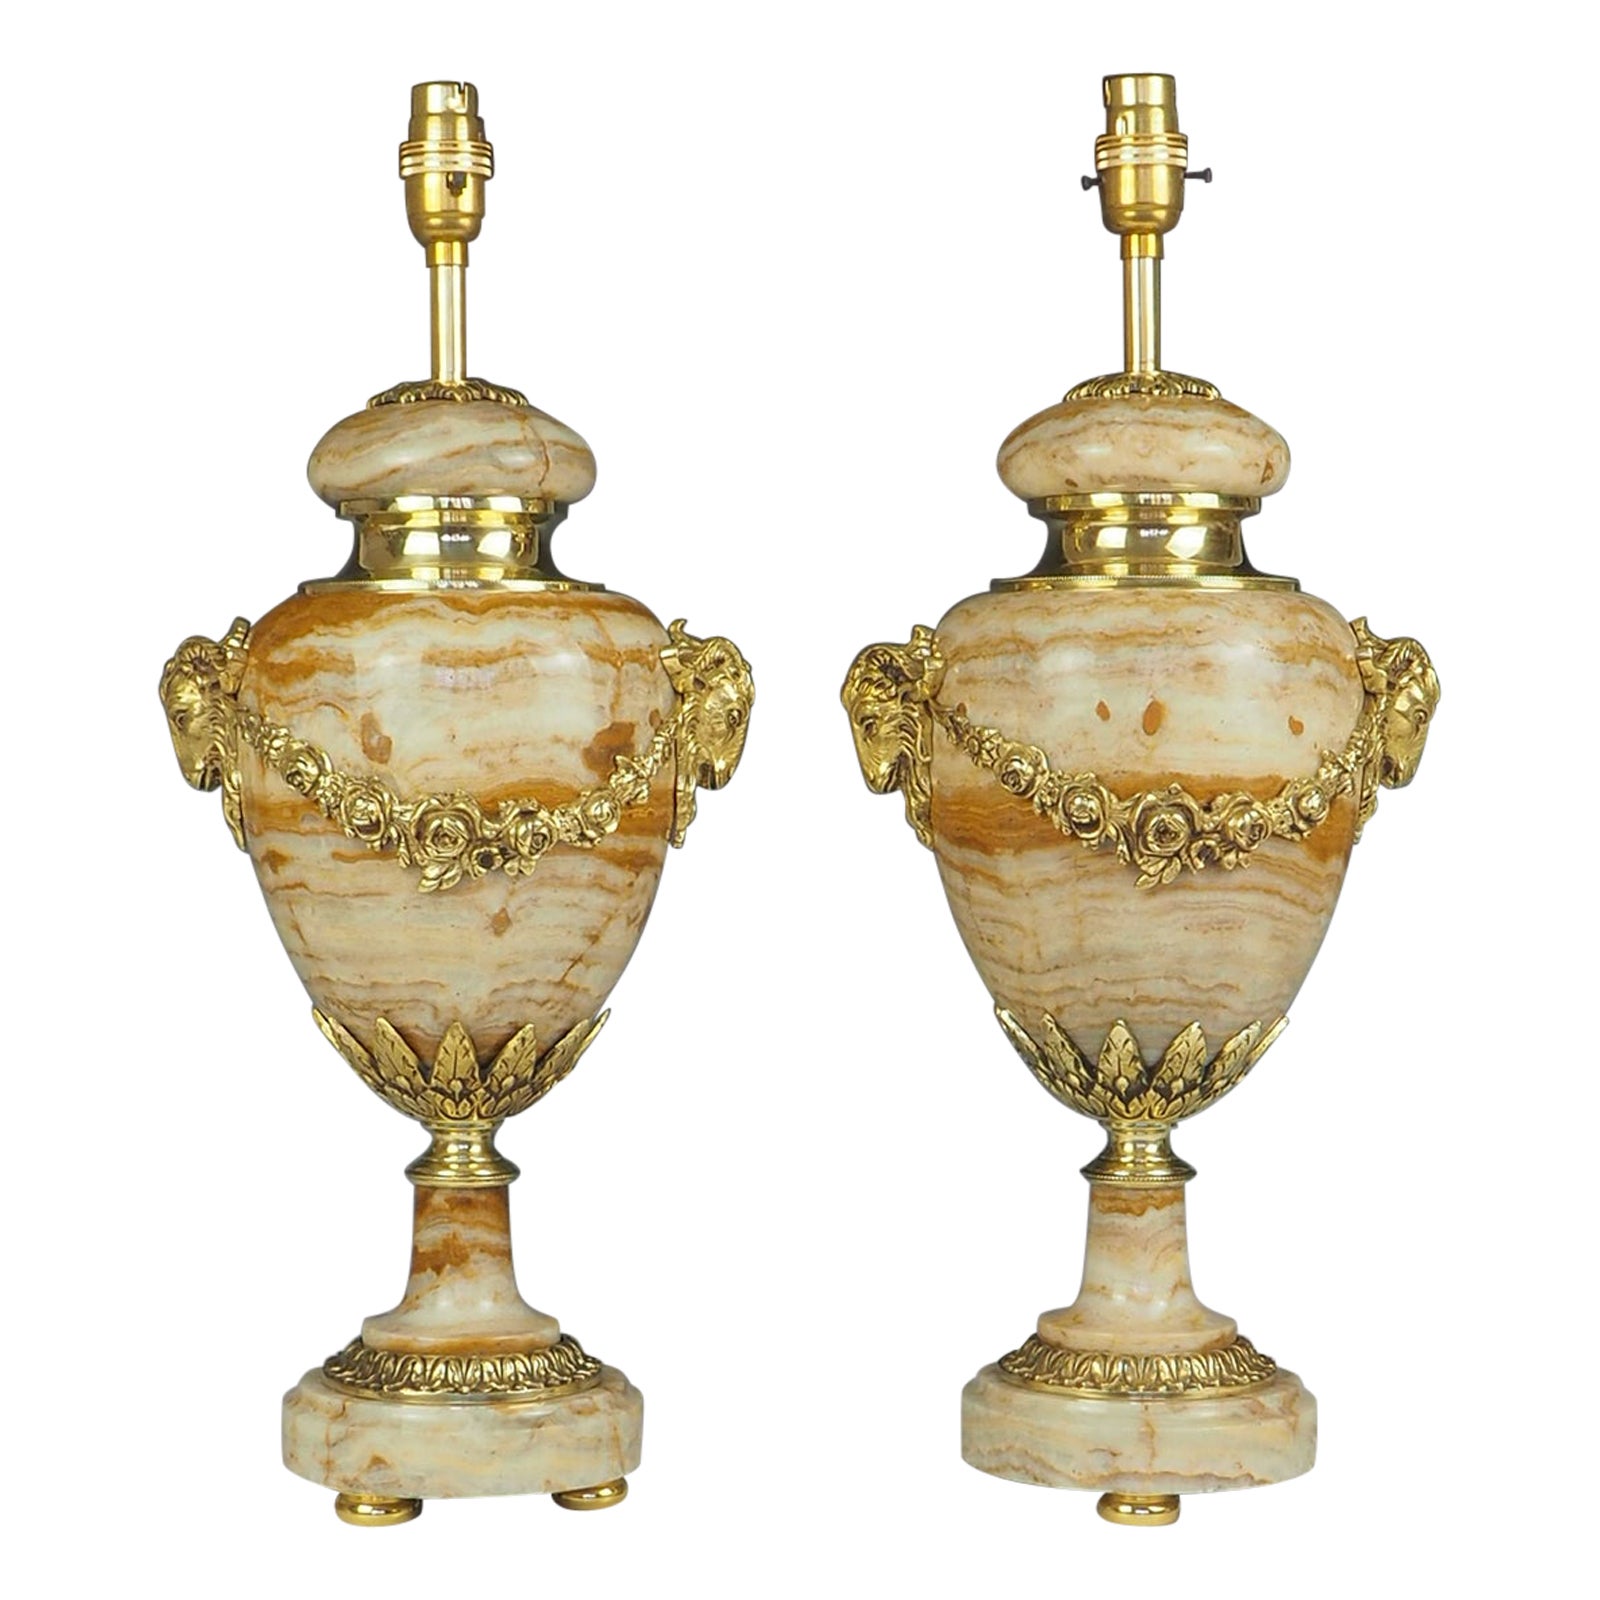 Antique Pair of French Ormolu Cassolette Marble Table Lamps For Sale